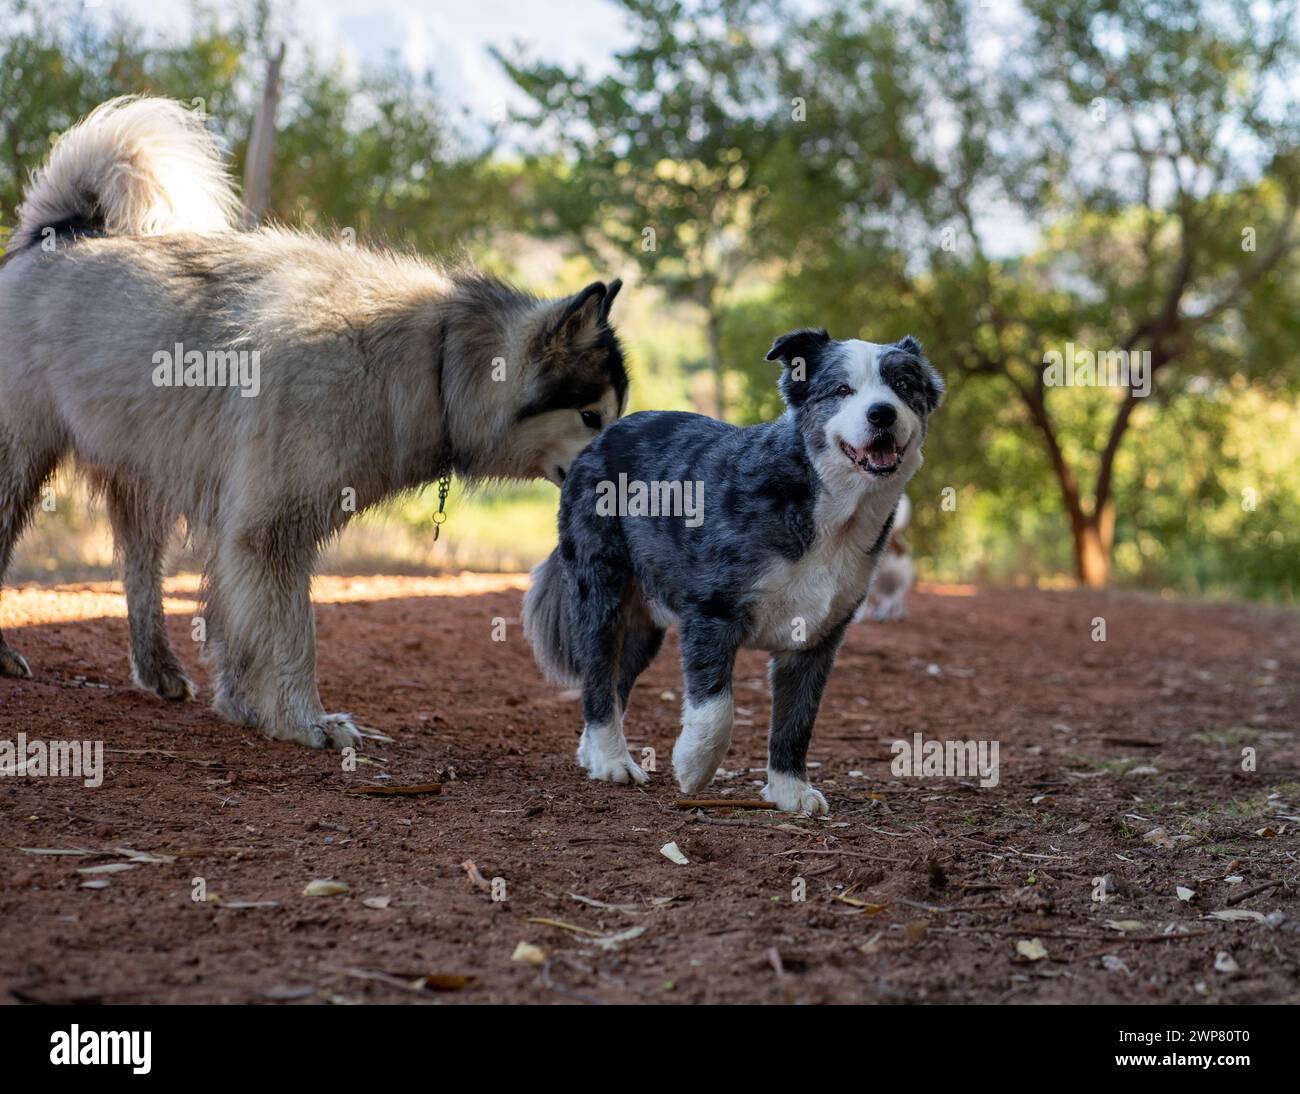 Two dogs in a dusty area, one white and grey Stock Photo